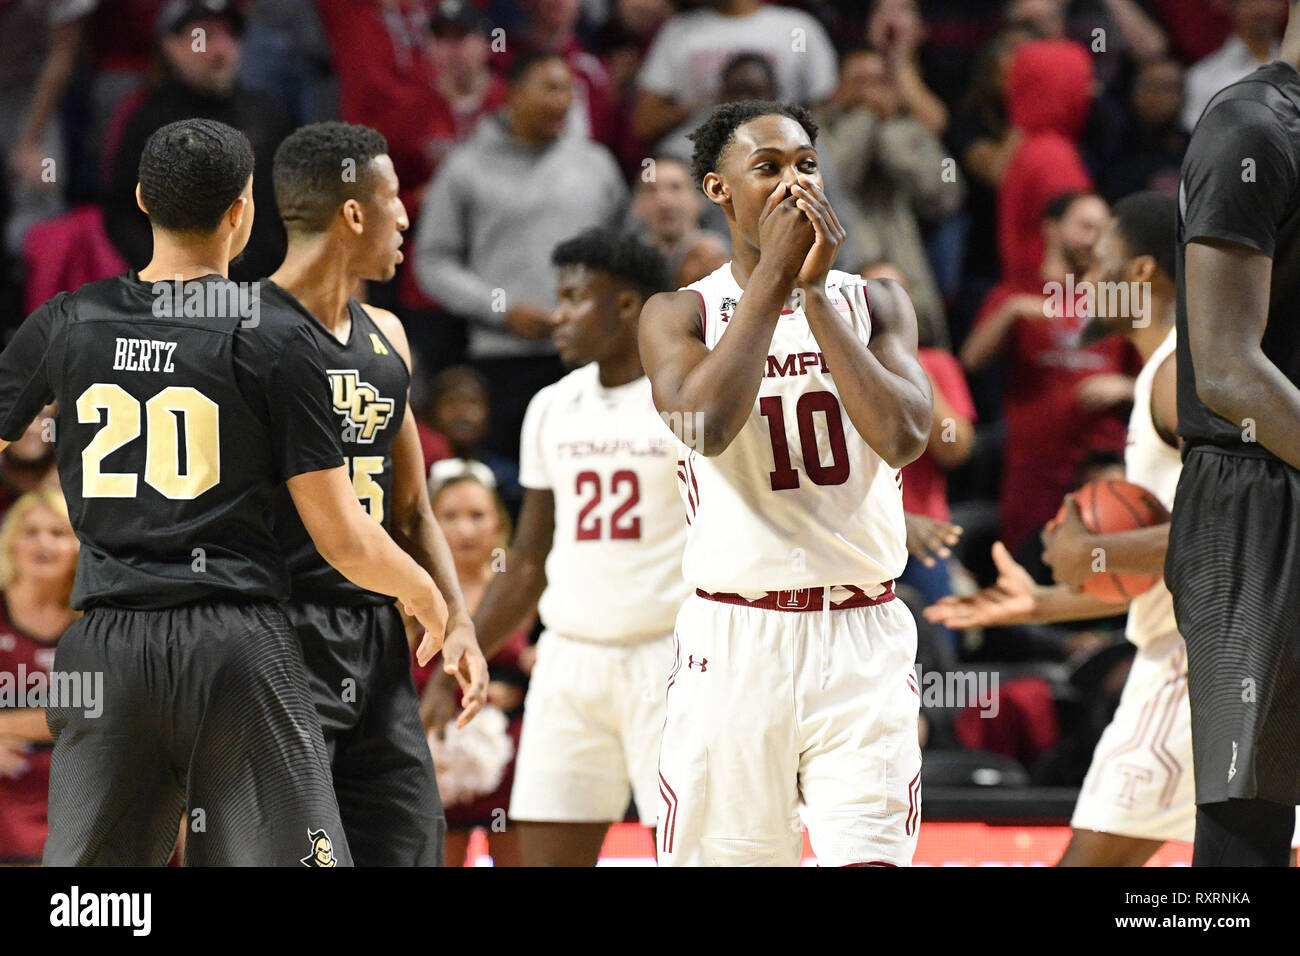 Philadelphia, Pennsylvania, USA. 9th Mar, 2019. Temple Owls guard SHIZZ ALSTON JR. (10) reacts after an apparent blown call during the American Athletic Conference basketball game played at the Liacouras Center in Philadelphia. Temple beat #25 UCF 67-62. Credit: Ken Inness/ZUMA Wire/Alamy Live News Stock Photo